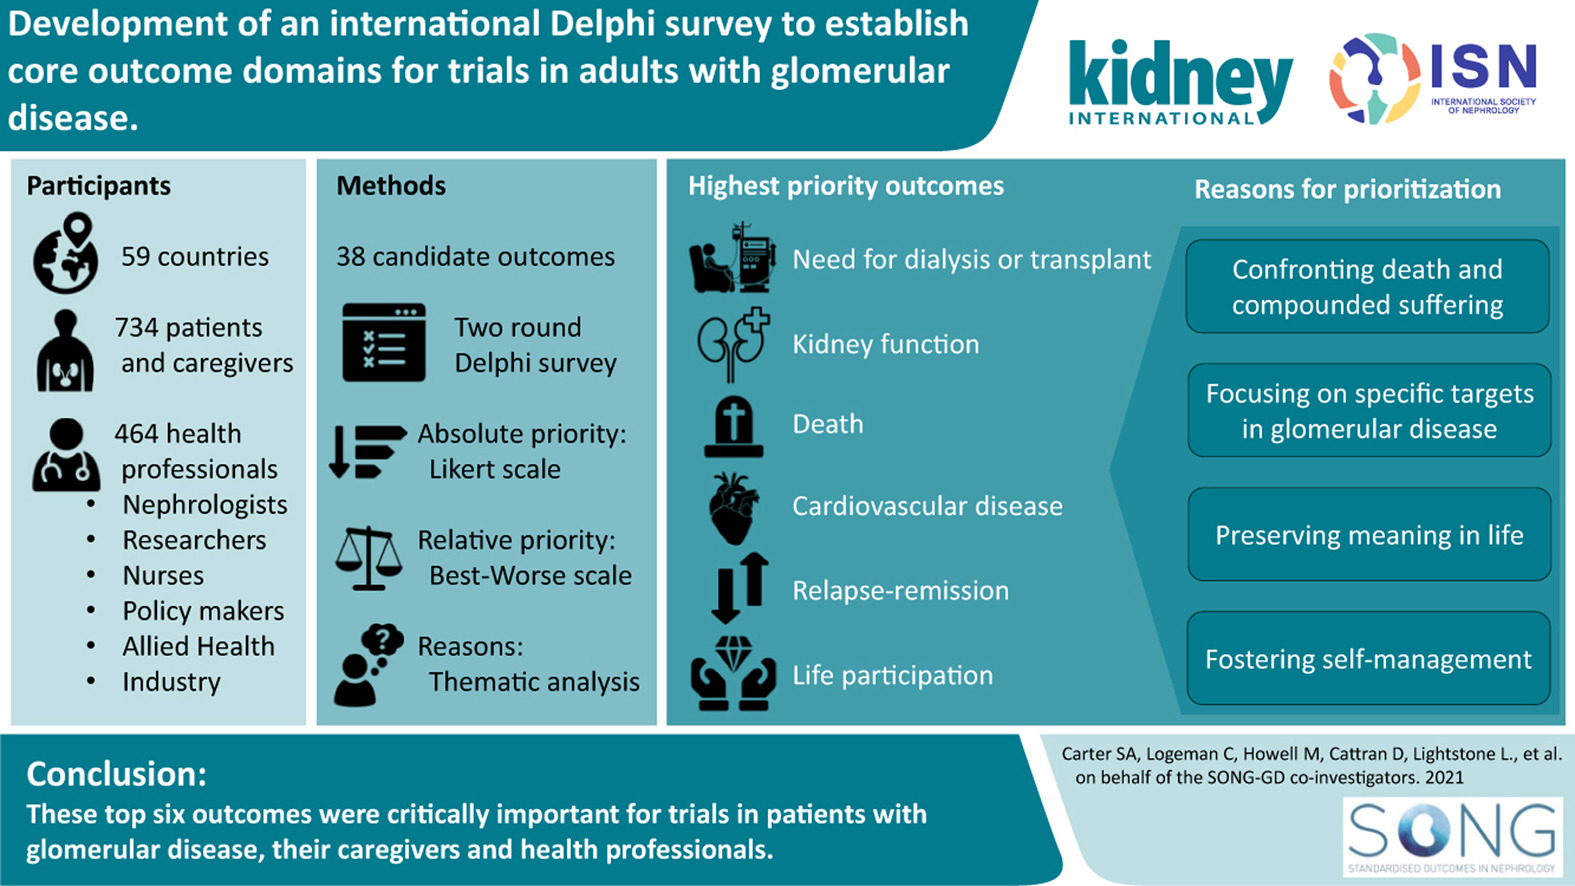 Development of an International Delphi Survey to Establish Core Outcome for Trials in Adults